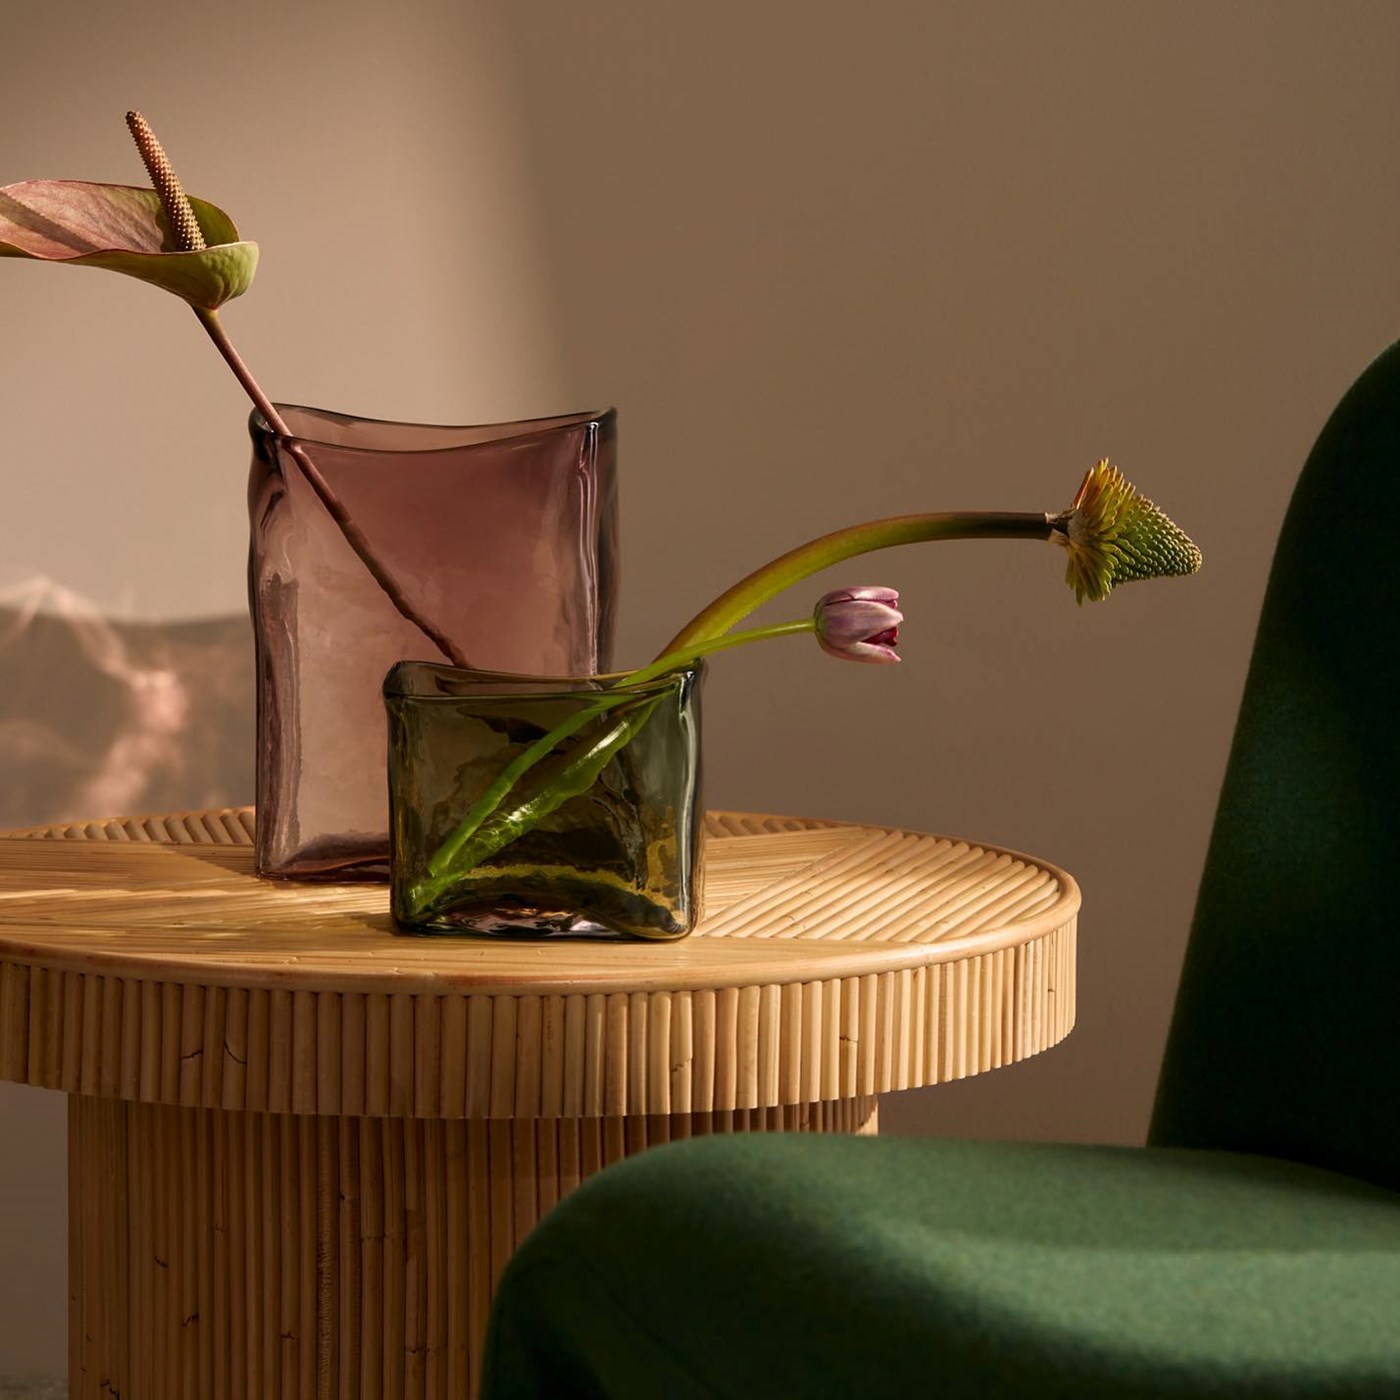 Two rectangular glass vases (one rose, one green) from Marmoset Found sitting on a circular wooden table 